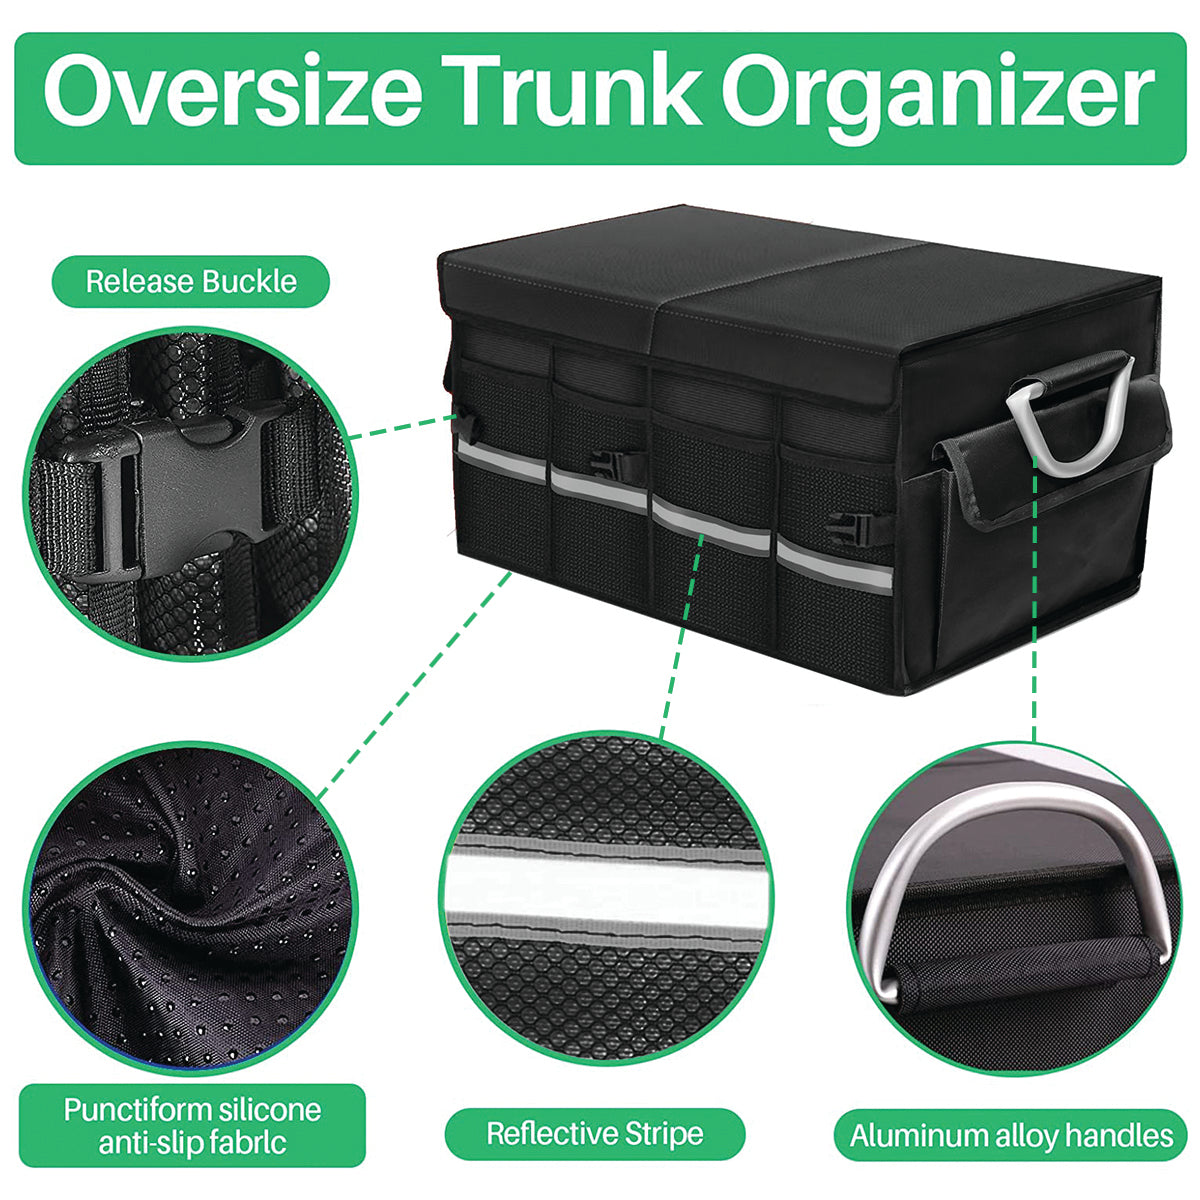 Big Trunk Organizer, Custom-Fit For Car, Cargo Organizer SUV Trunk Storage Waterproof Collapsible Durable Multi Compartments DLKX253